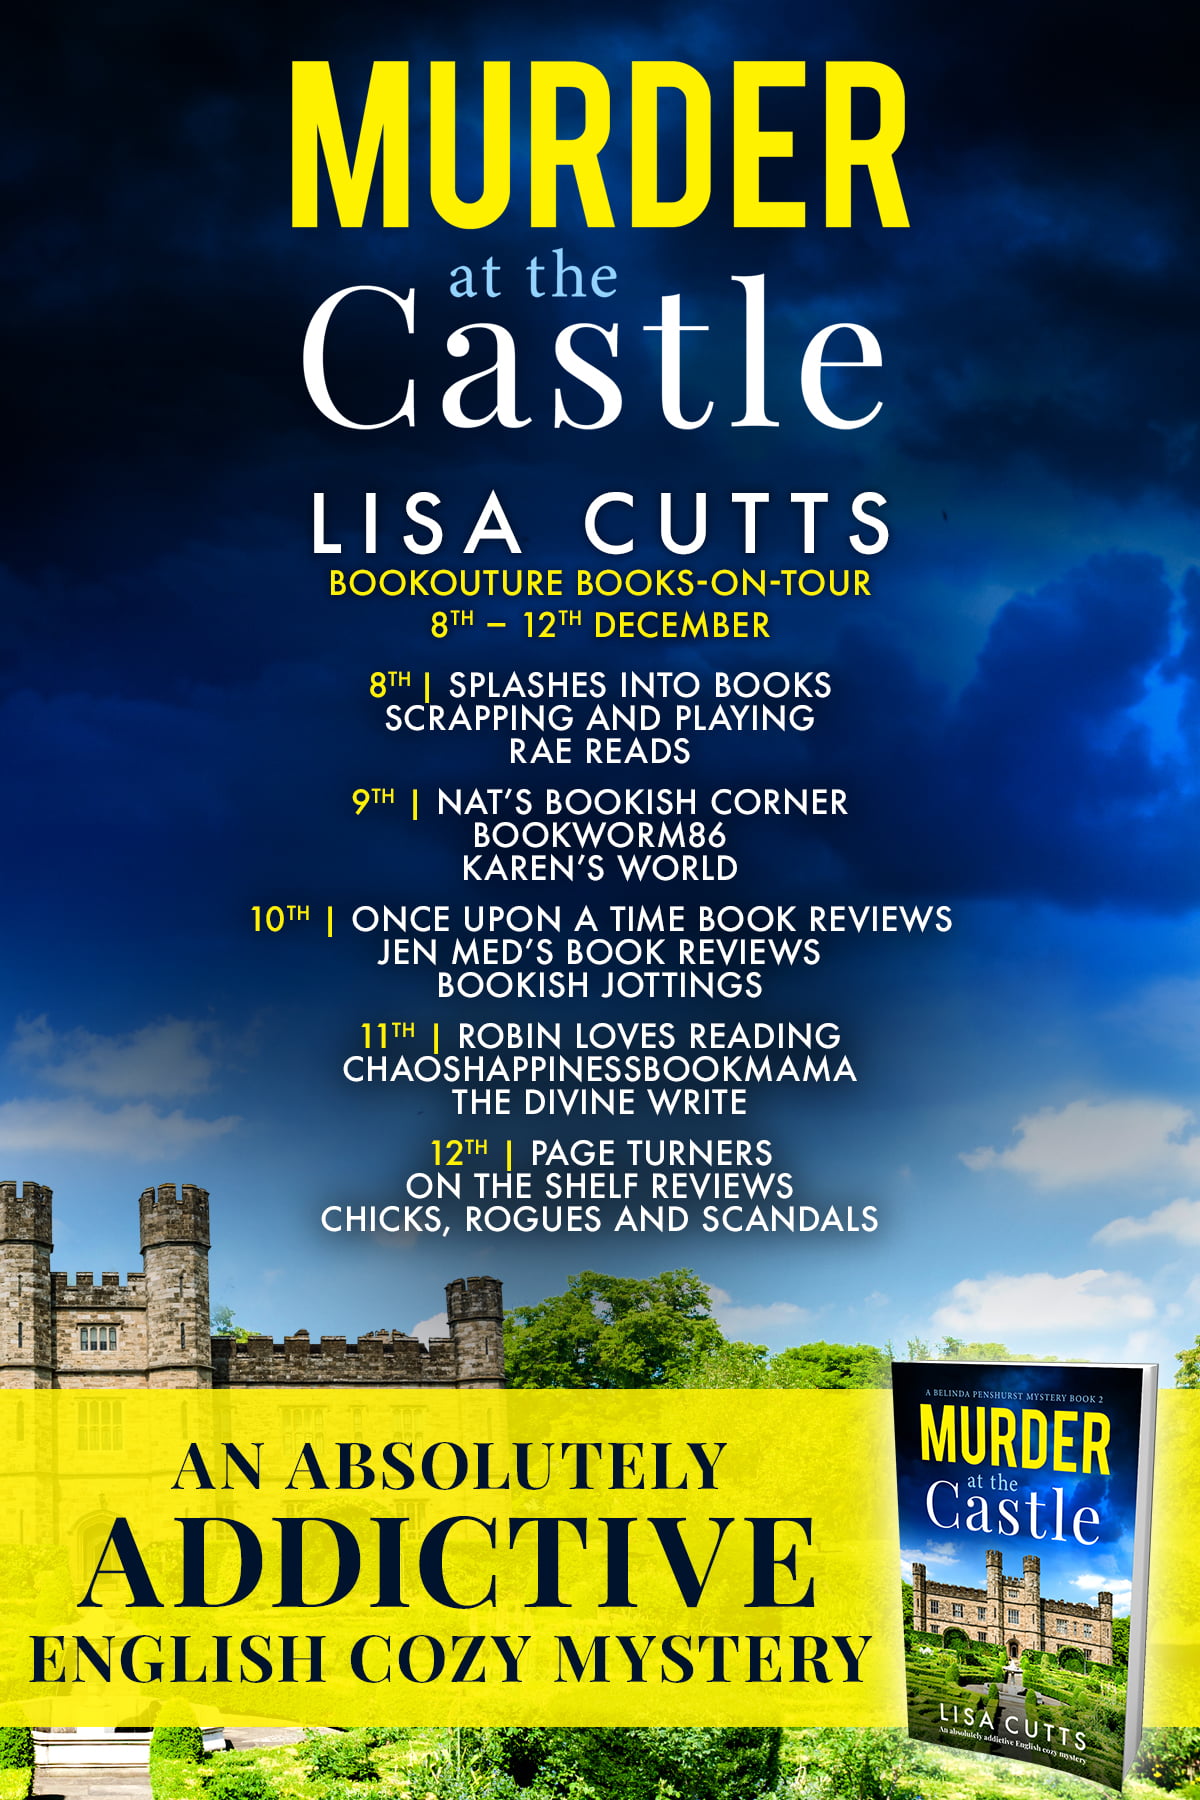 MURDER AT THE CASTLE BOOK TOUR